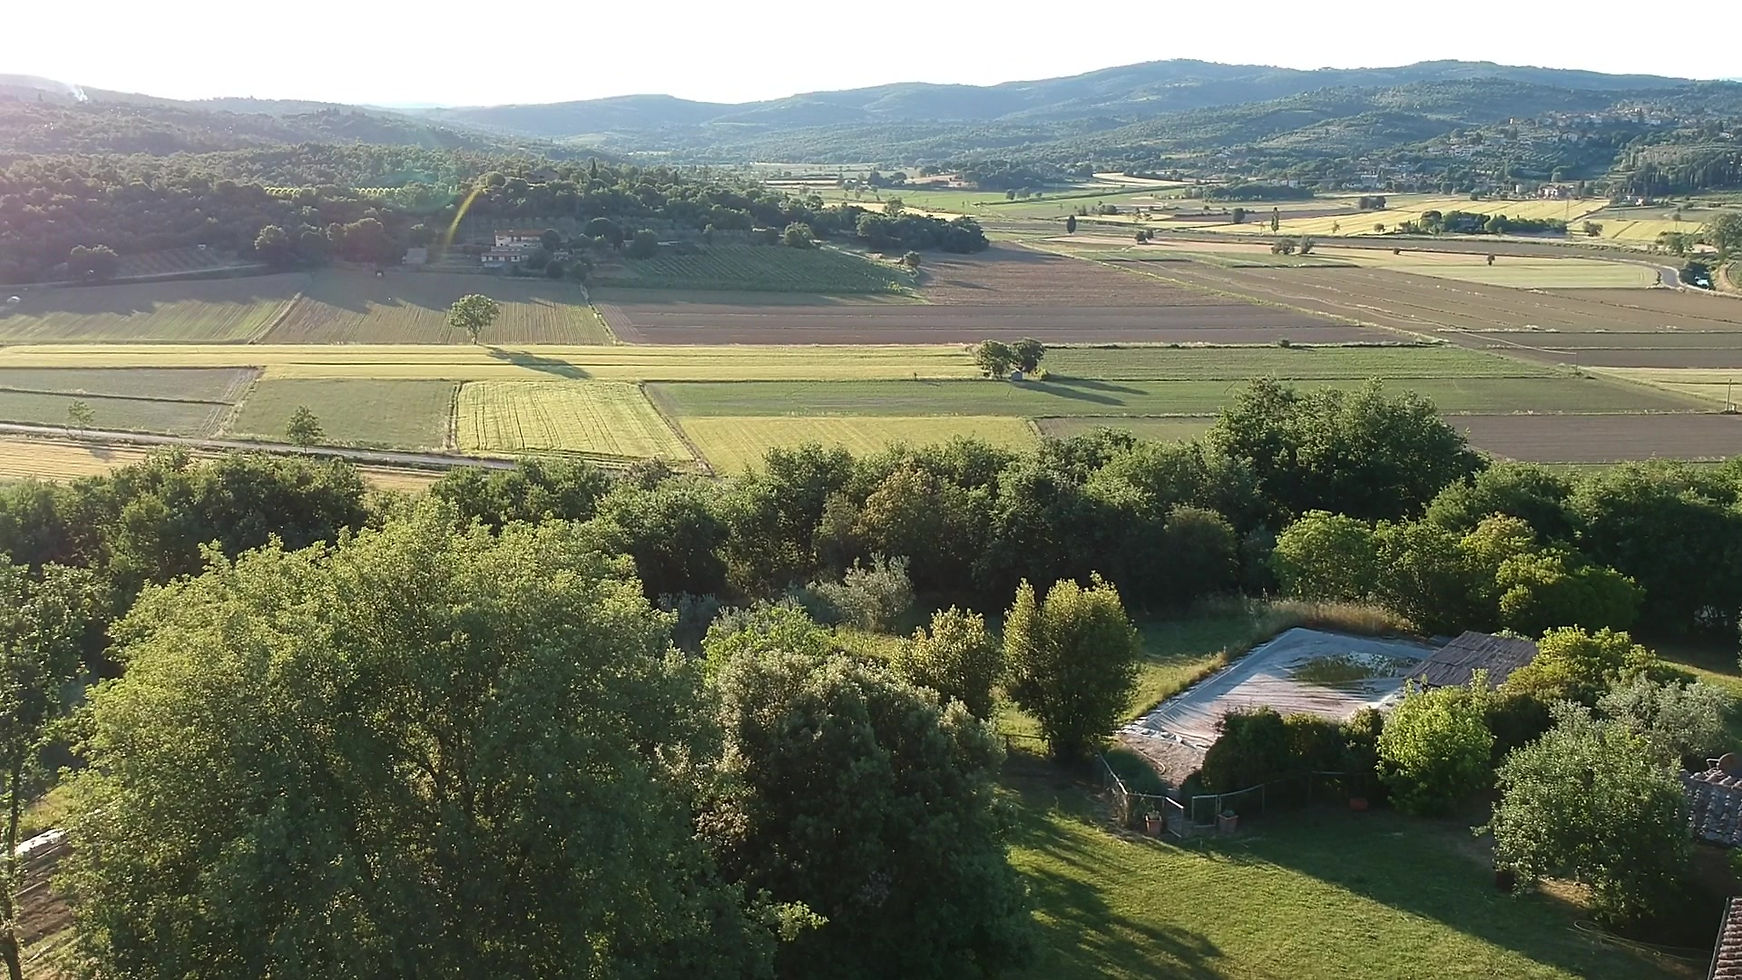 Our beautiful Italy location!